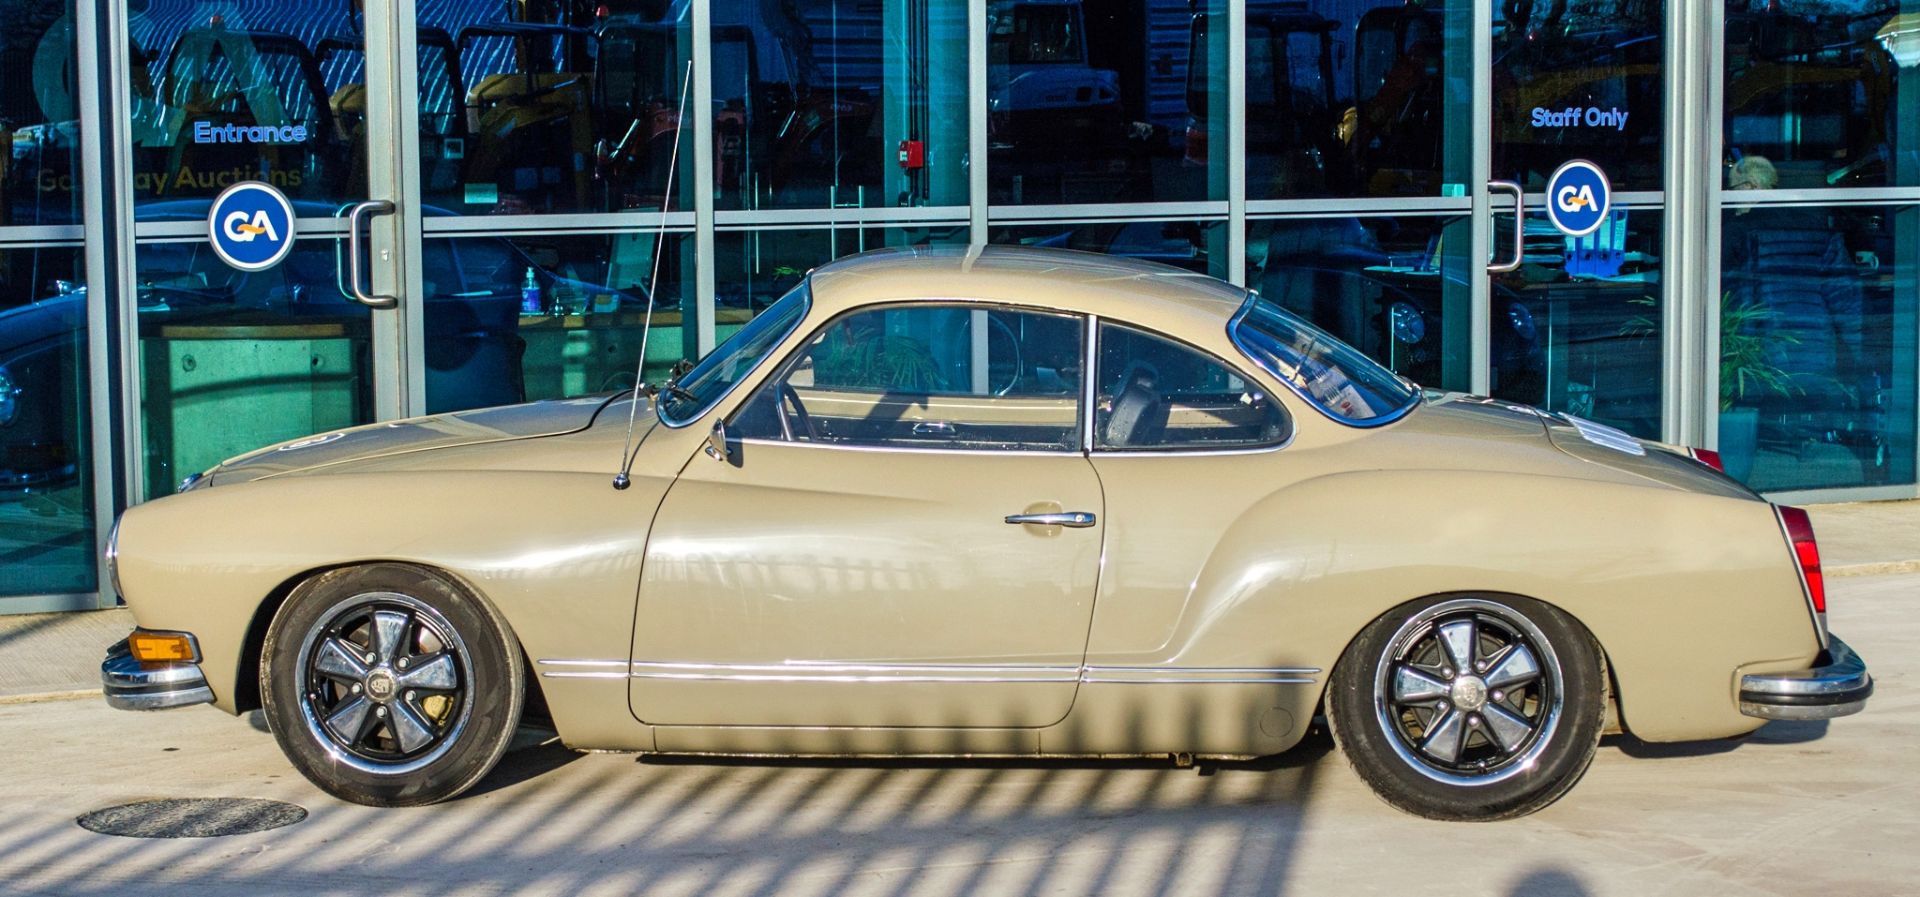 1972 Volkswagen Karmann Ghia 1641cc two door coupe - Image 16 of 52